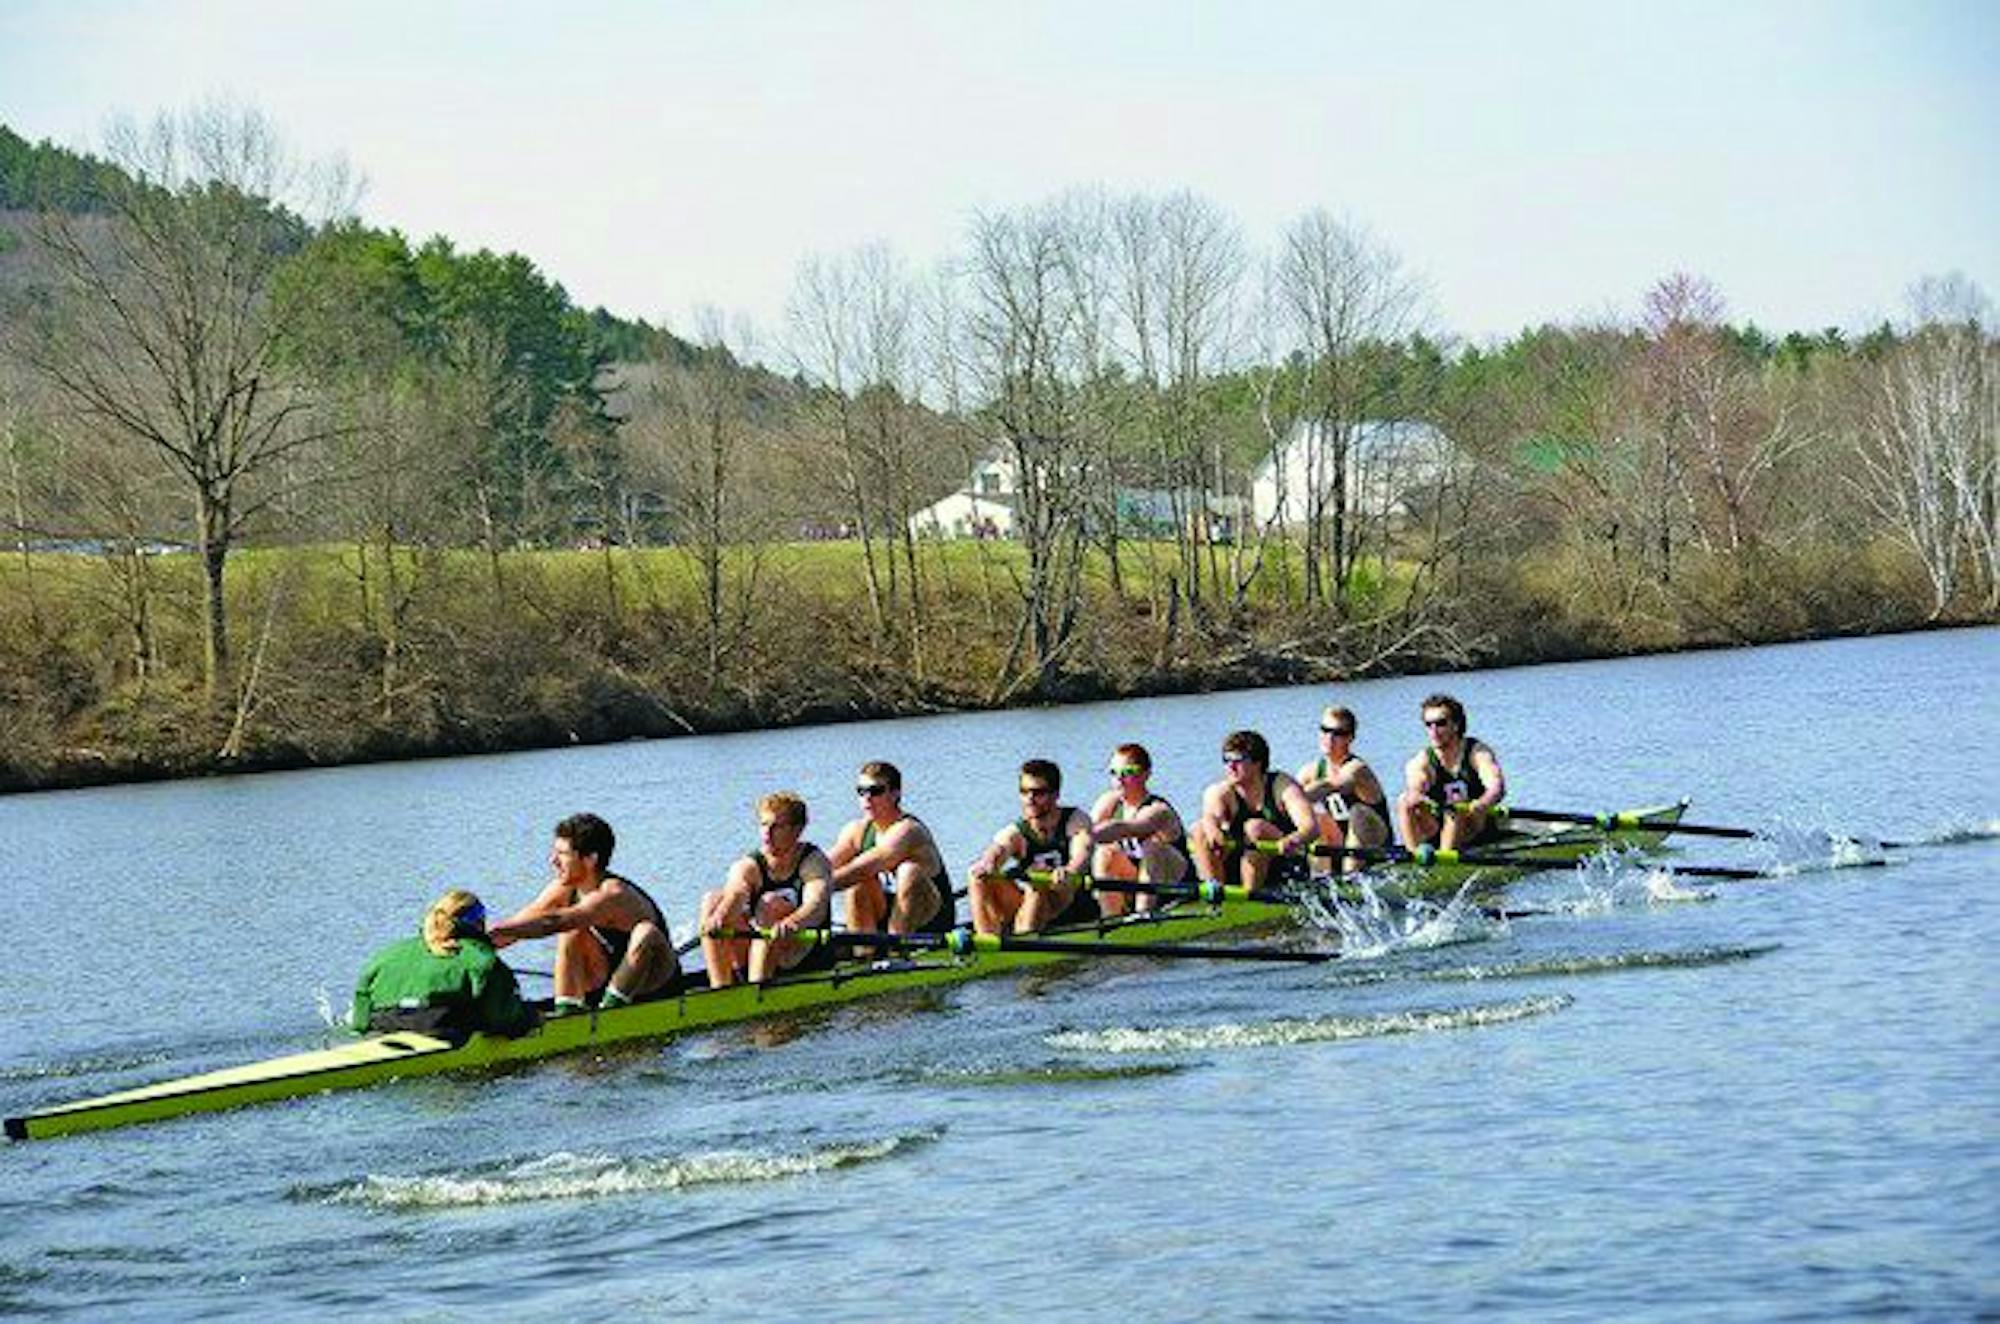 Olympians Anthony Fahden ’08 and Josh Konieczny ’13 rowed for men’s lightweight.